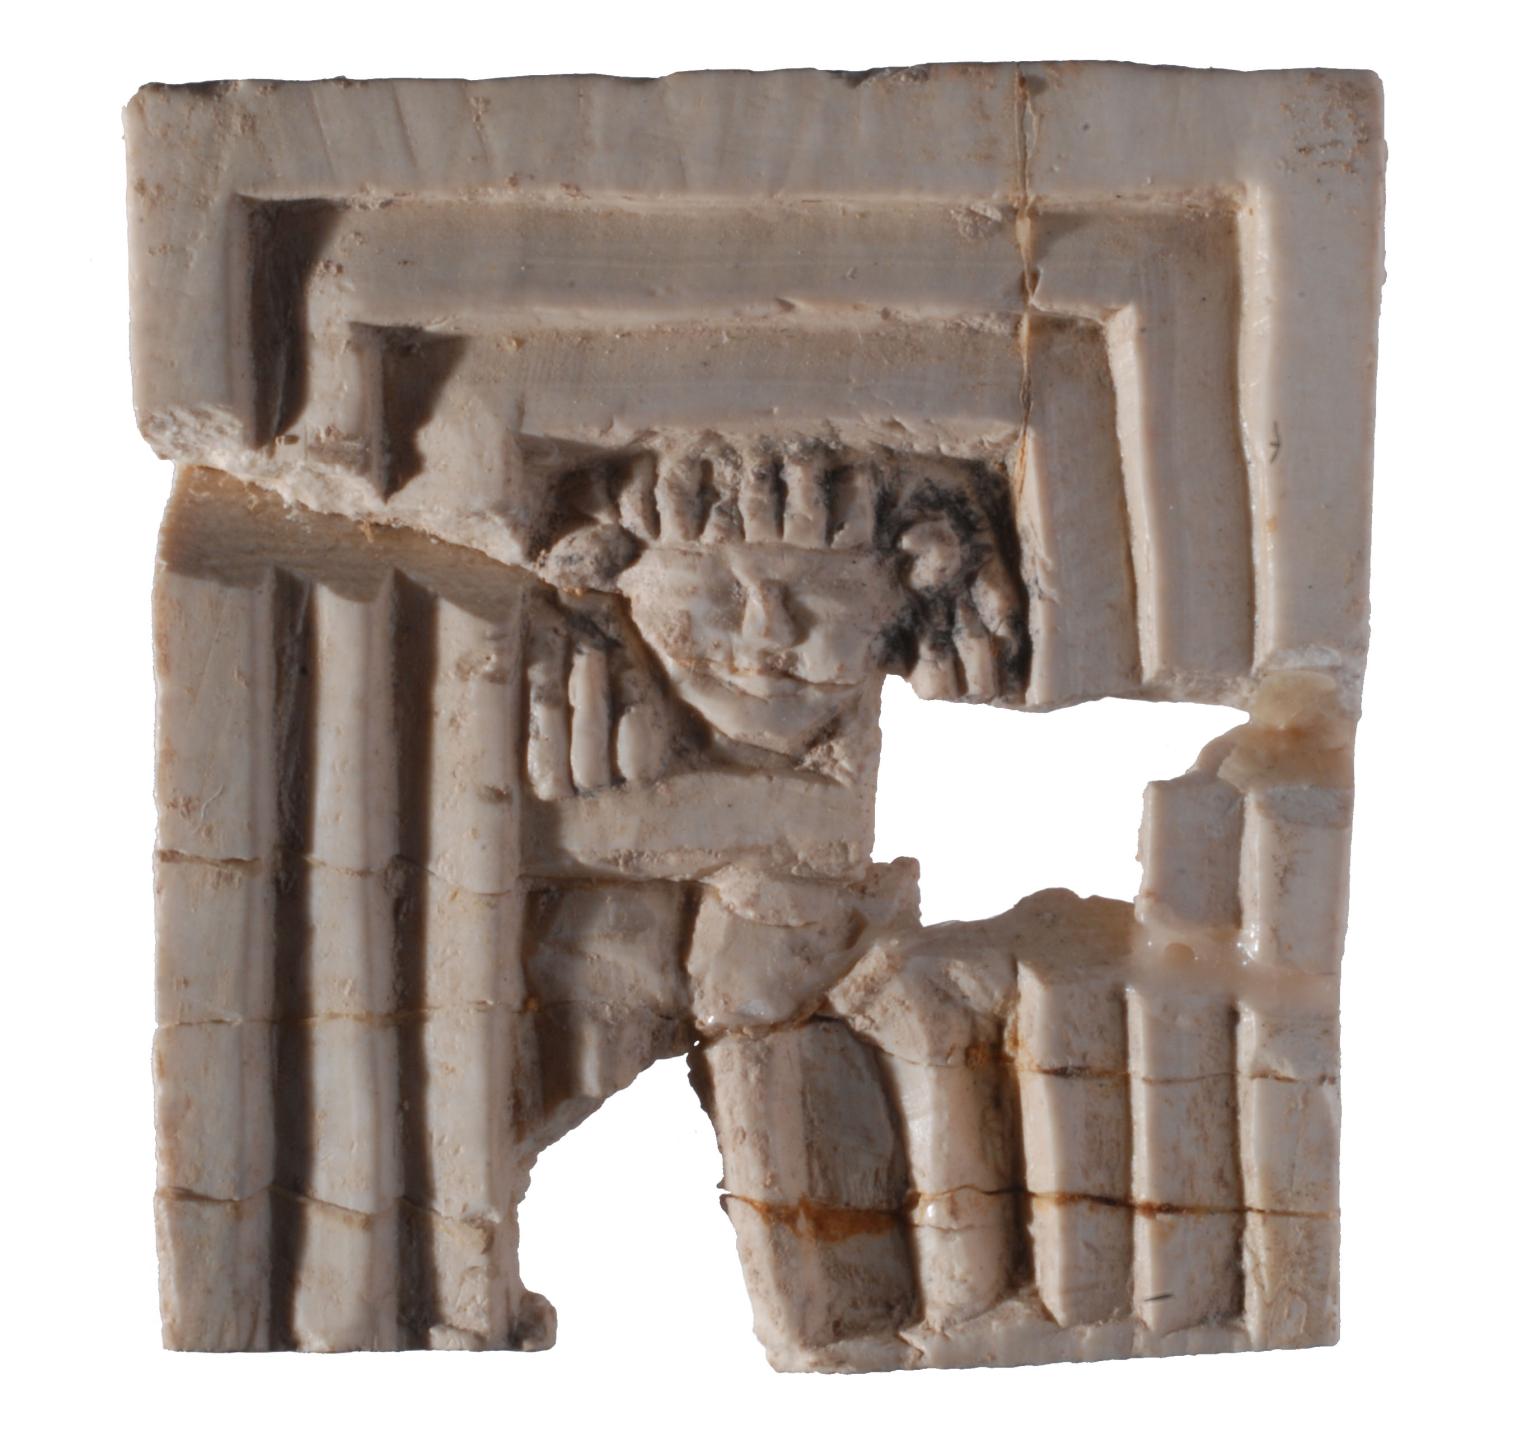 Square-shaped ivory relief of a face in a triple-recessed frame.